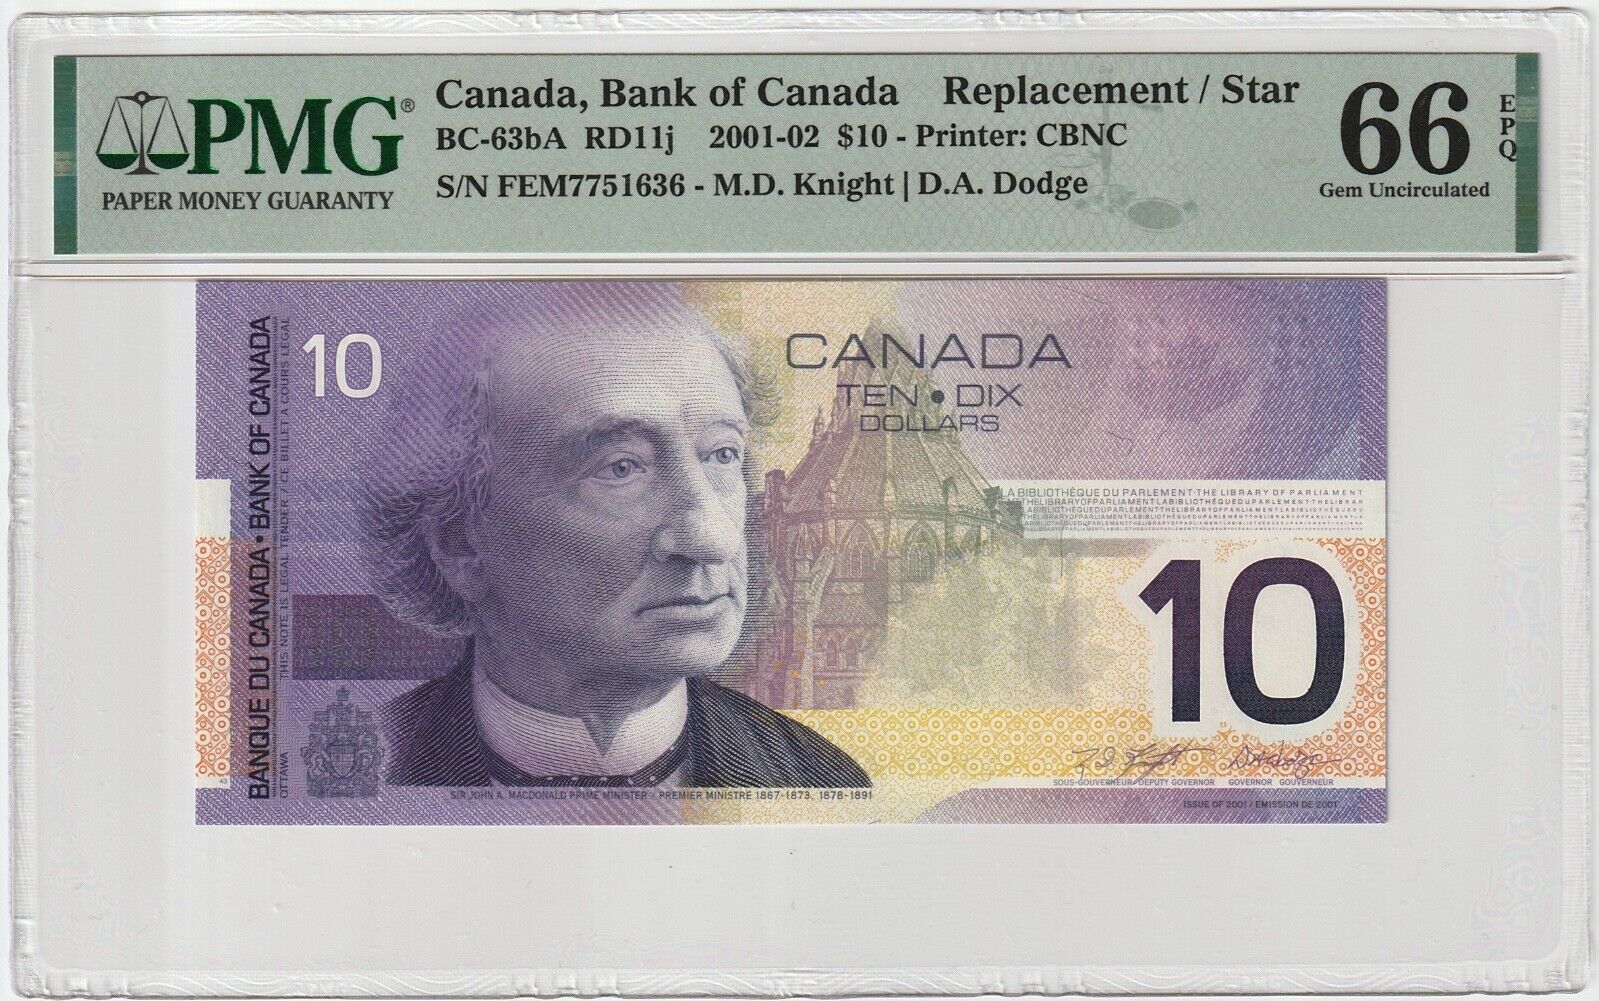 2001-02 Bank of Canada $10 "REPLACEMENT /STAR" Banknote PMG 66 EPQ (BC-63bA)